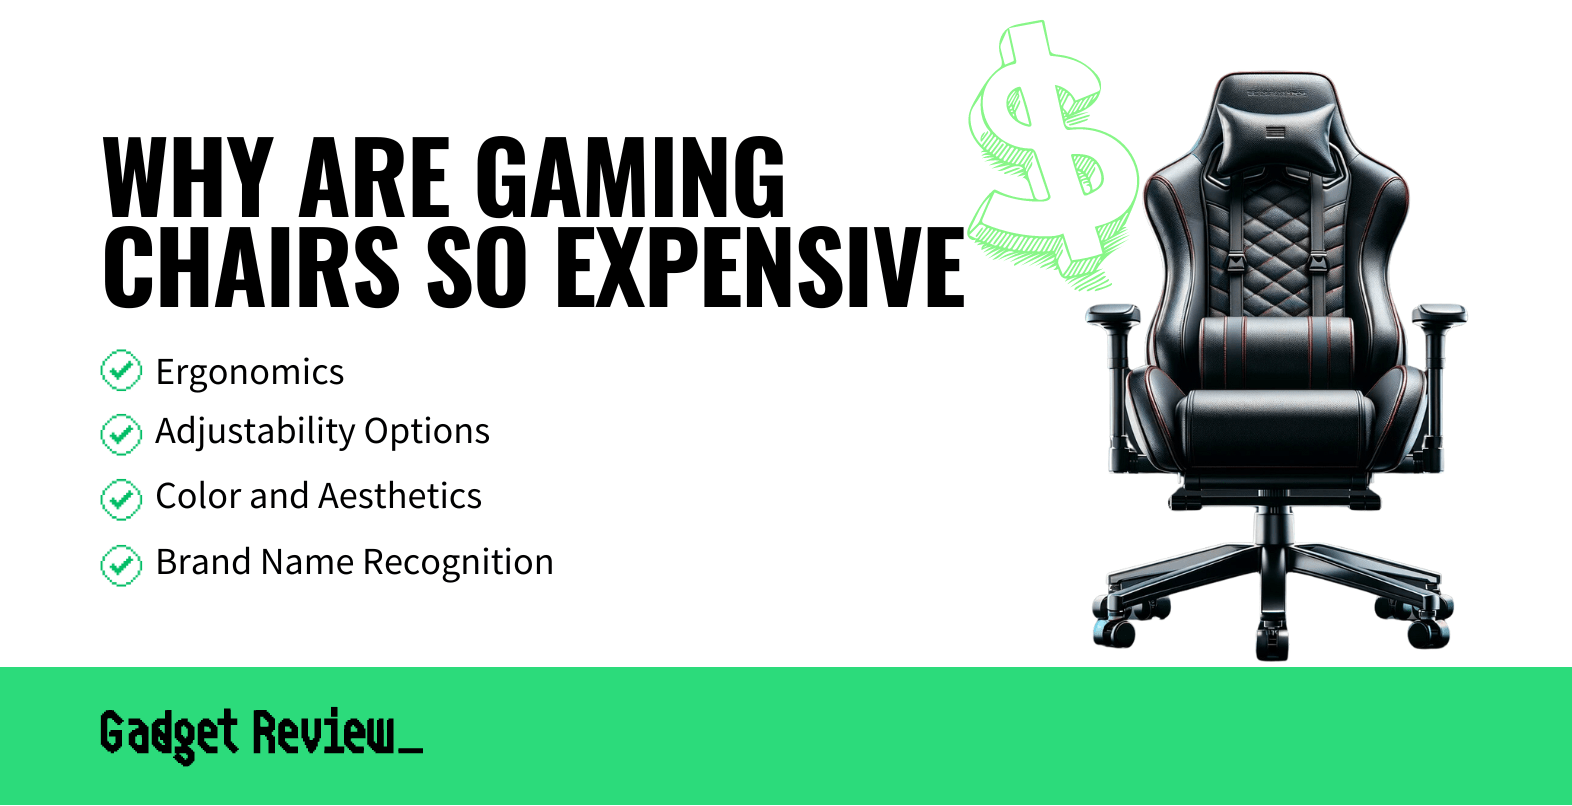 Why Are Gaming Chairs So Expensive?